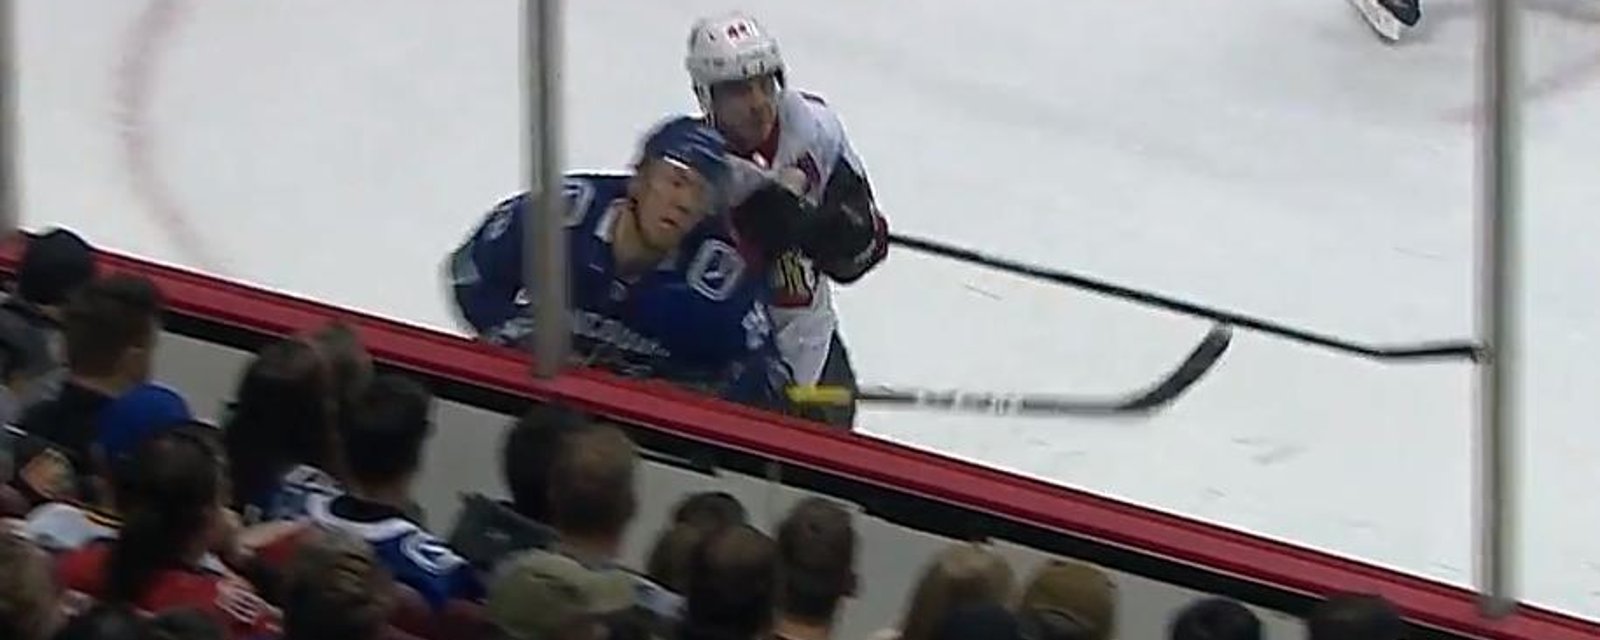 Breaking: NHL to suspend Pageau for predatory hit on Sautner?!